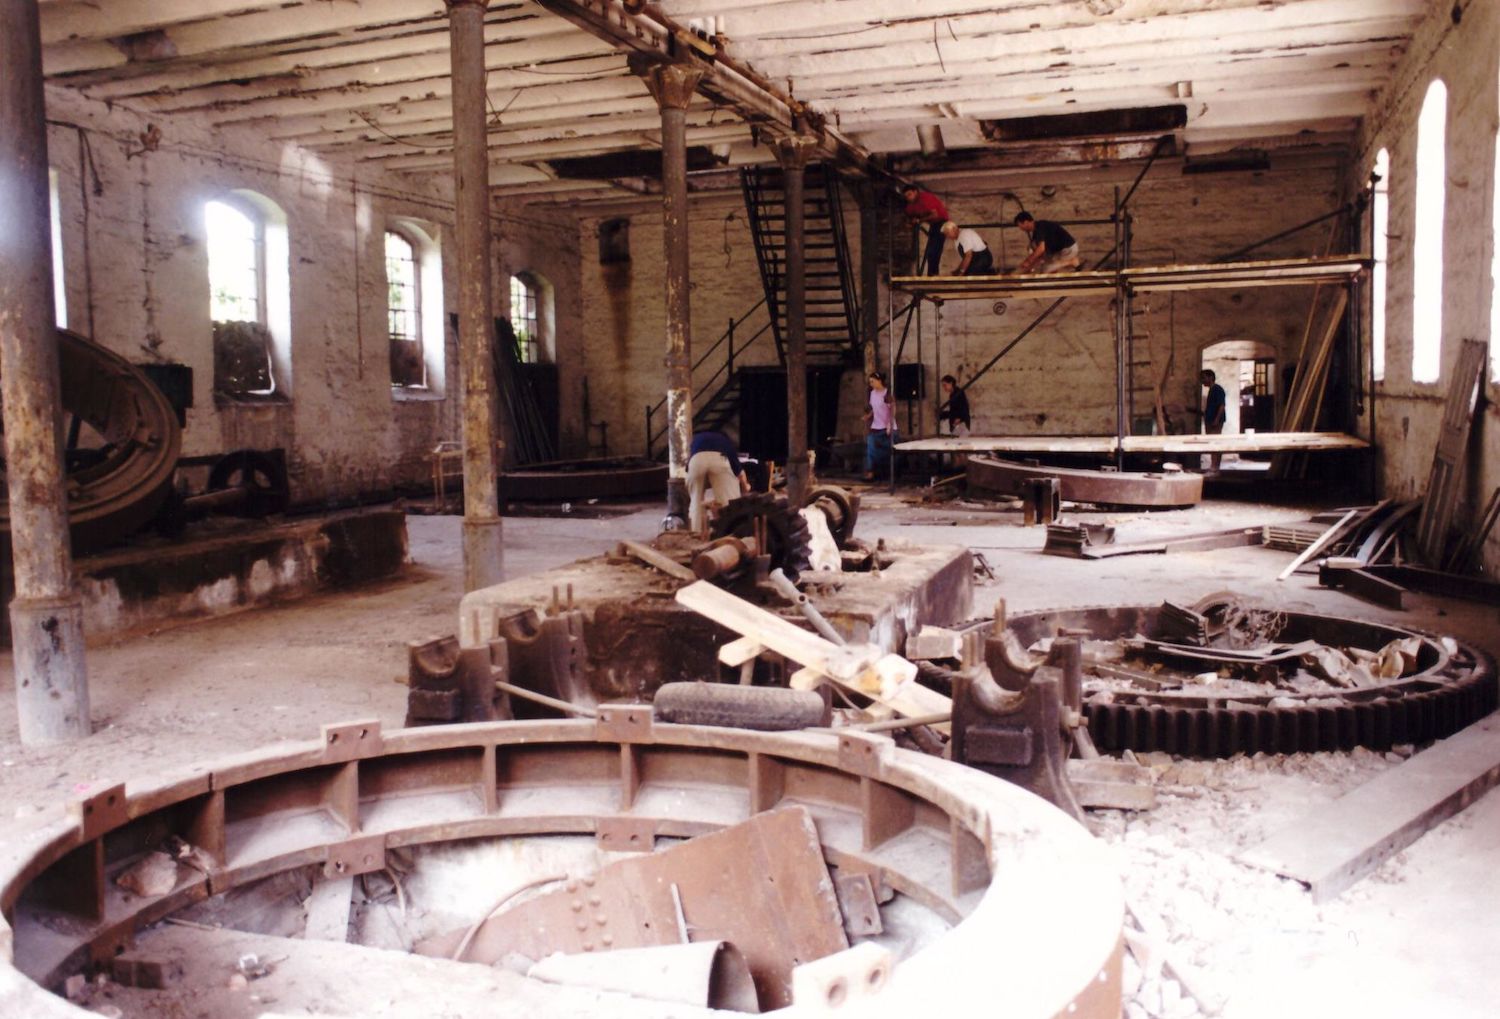 Removing the industrial machinery from the Sugar Factory in 1995, as construction of the theatre began